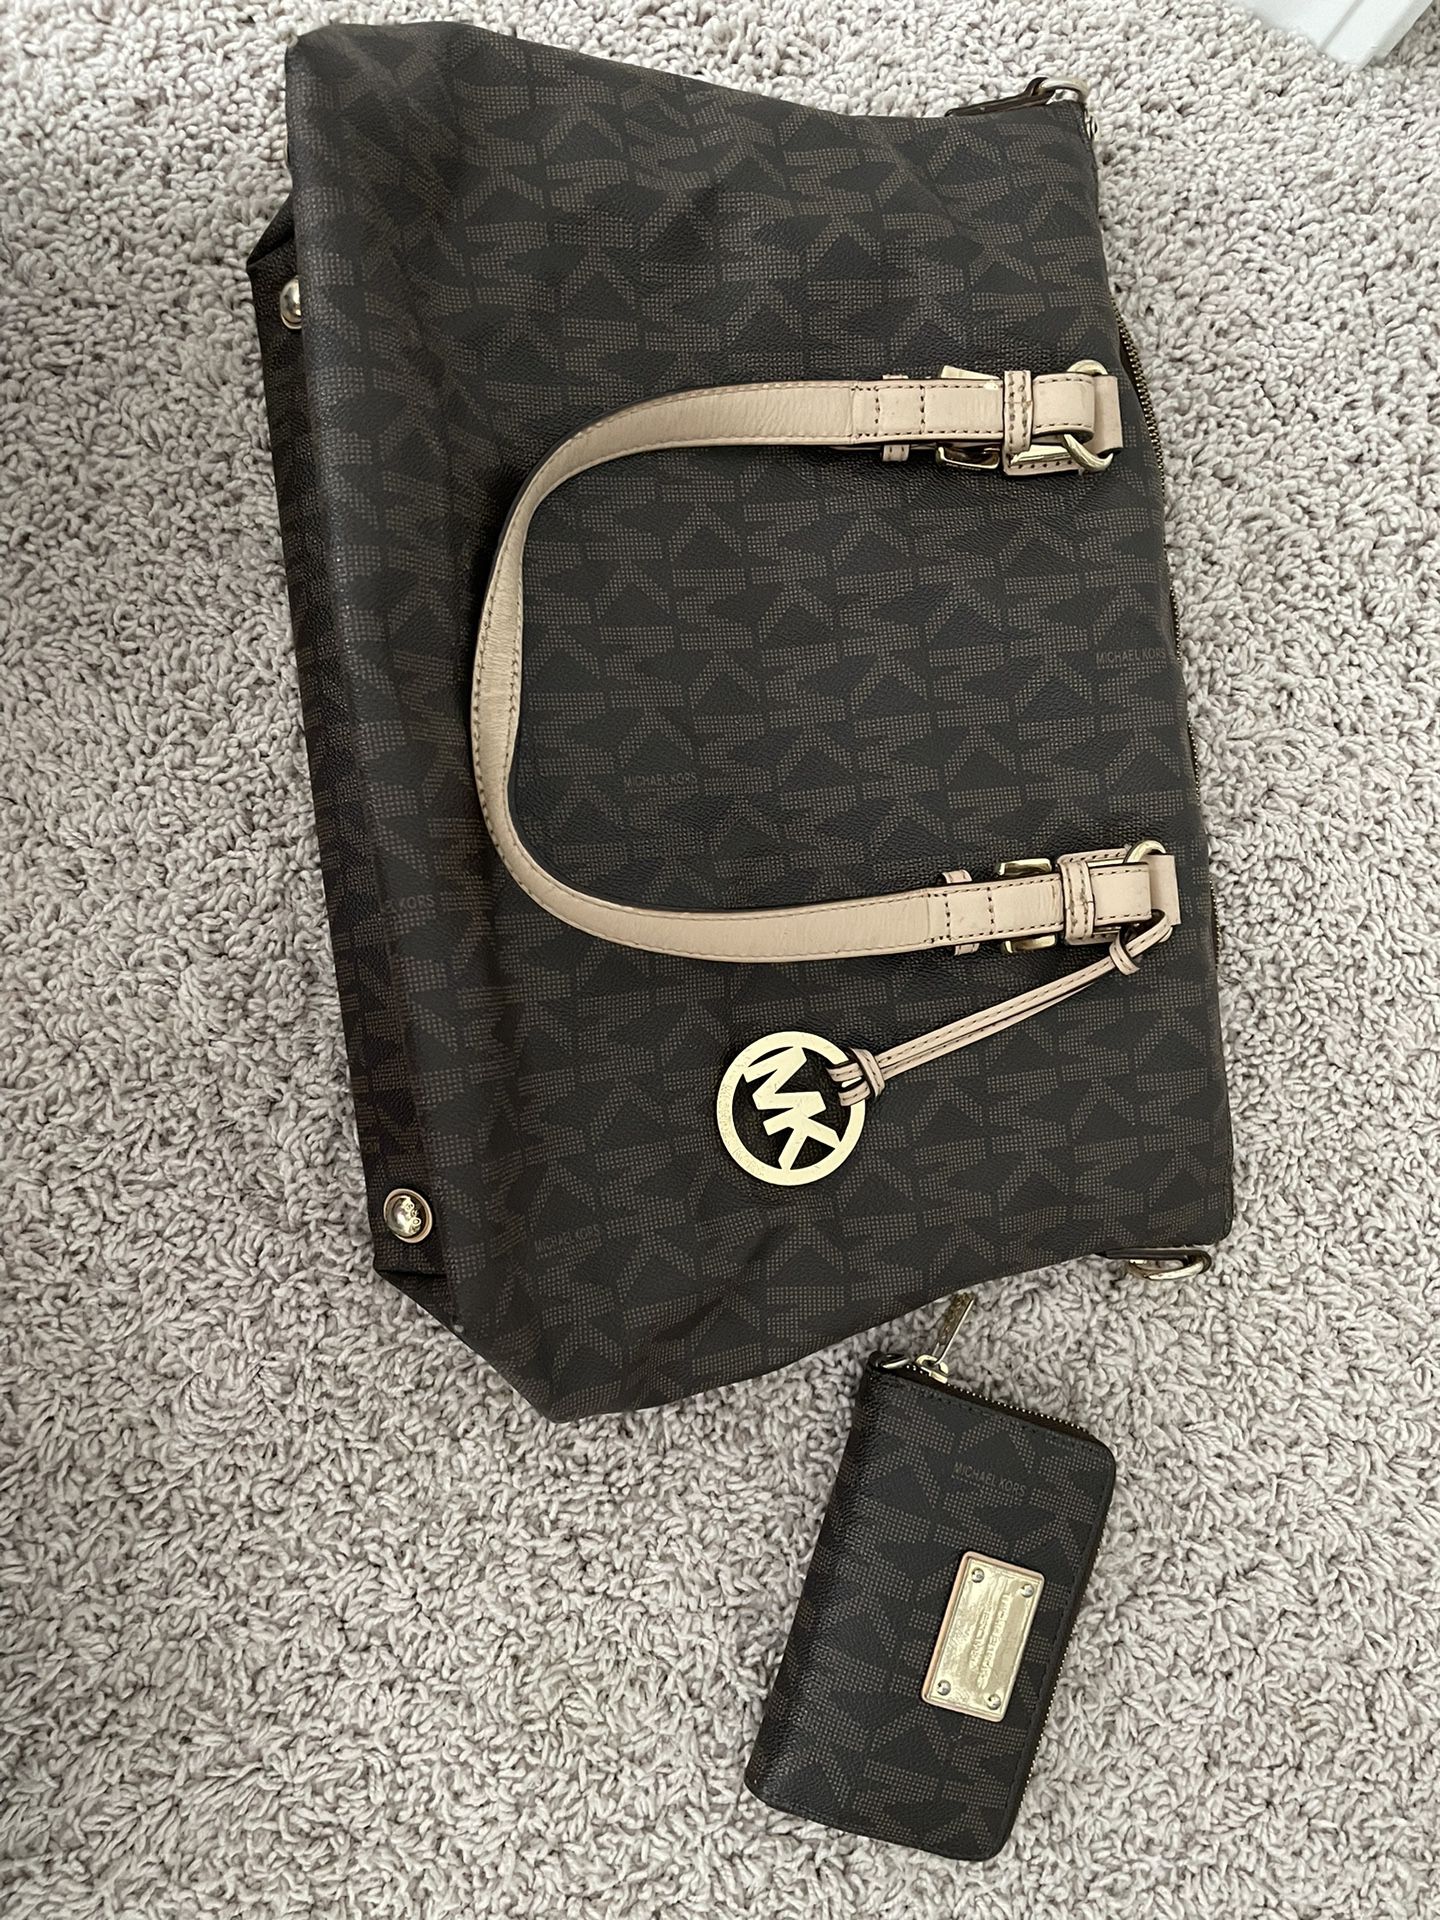 Michael Kors Large Bag With Wallet